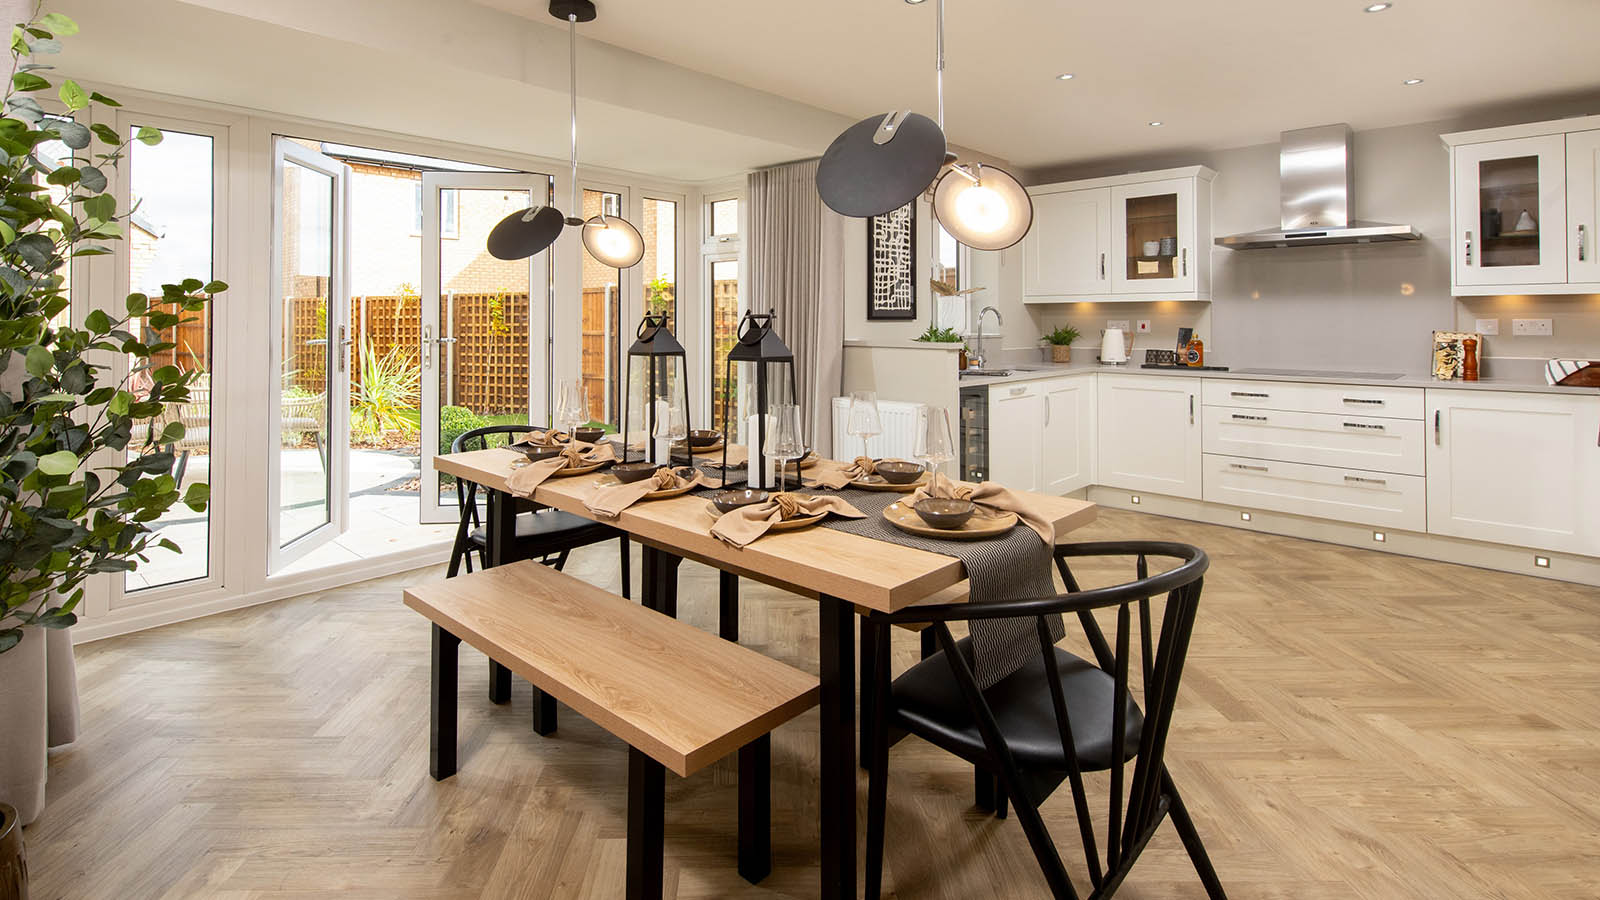 'Holden' show home at Priors Hall Park